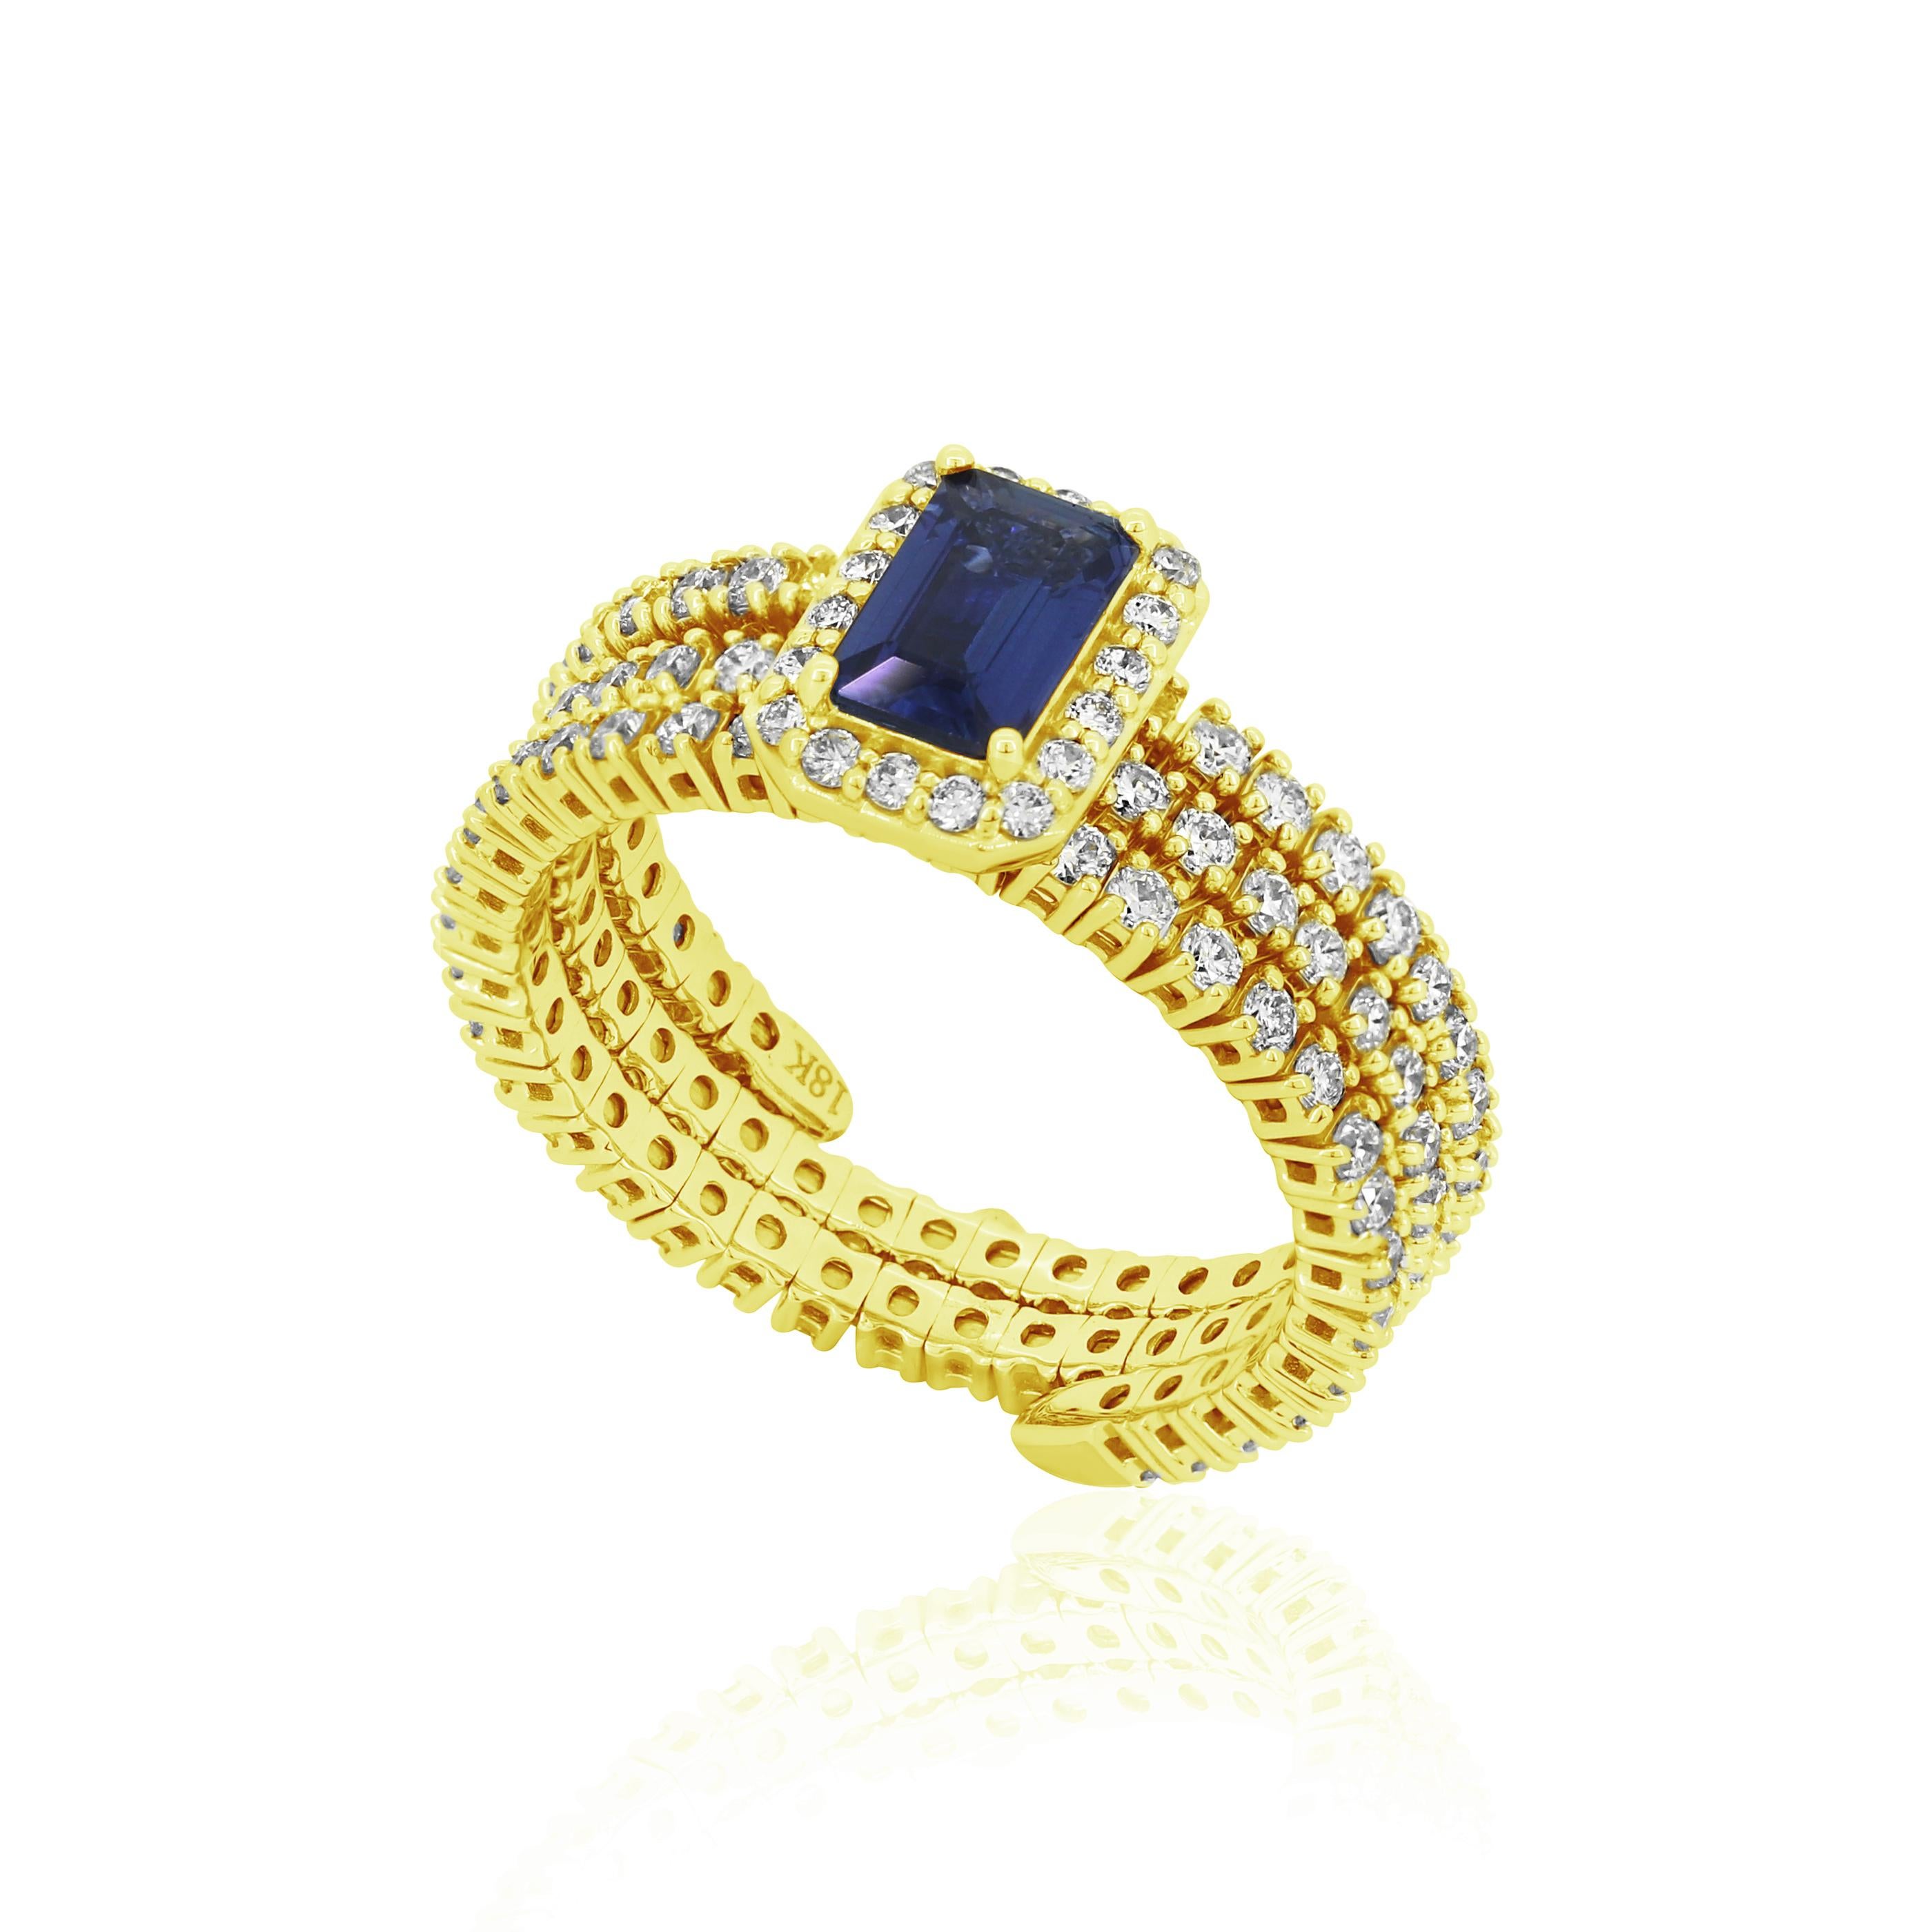 This Gemistry blue sapphire adjustable ring in 18 Karat yellow gold with diamond displays alluring hues and a lot of sparkle. The ring's magnificent octagonal cut blue sapphire is set in the center, and a diamond halo surrounds it. Round white